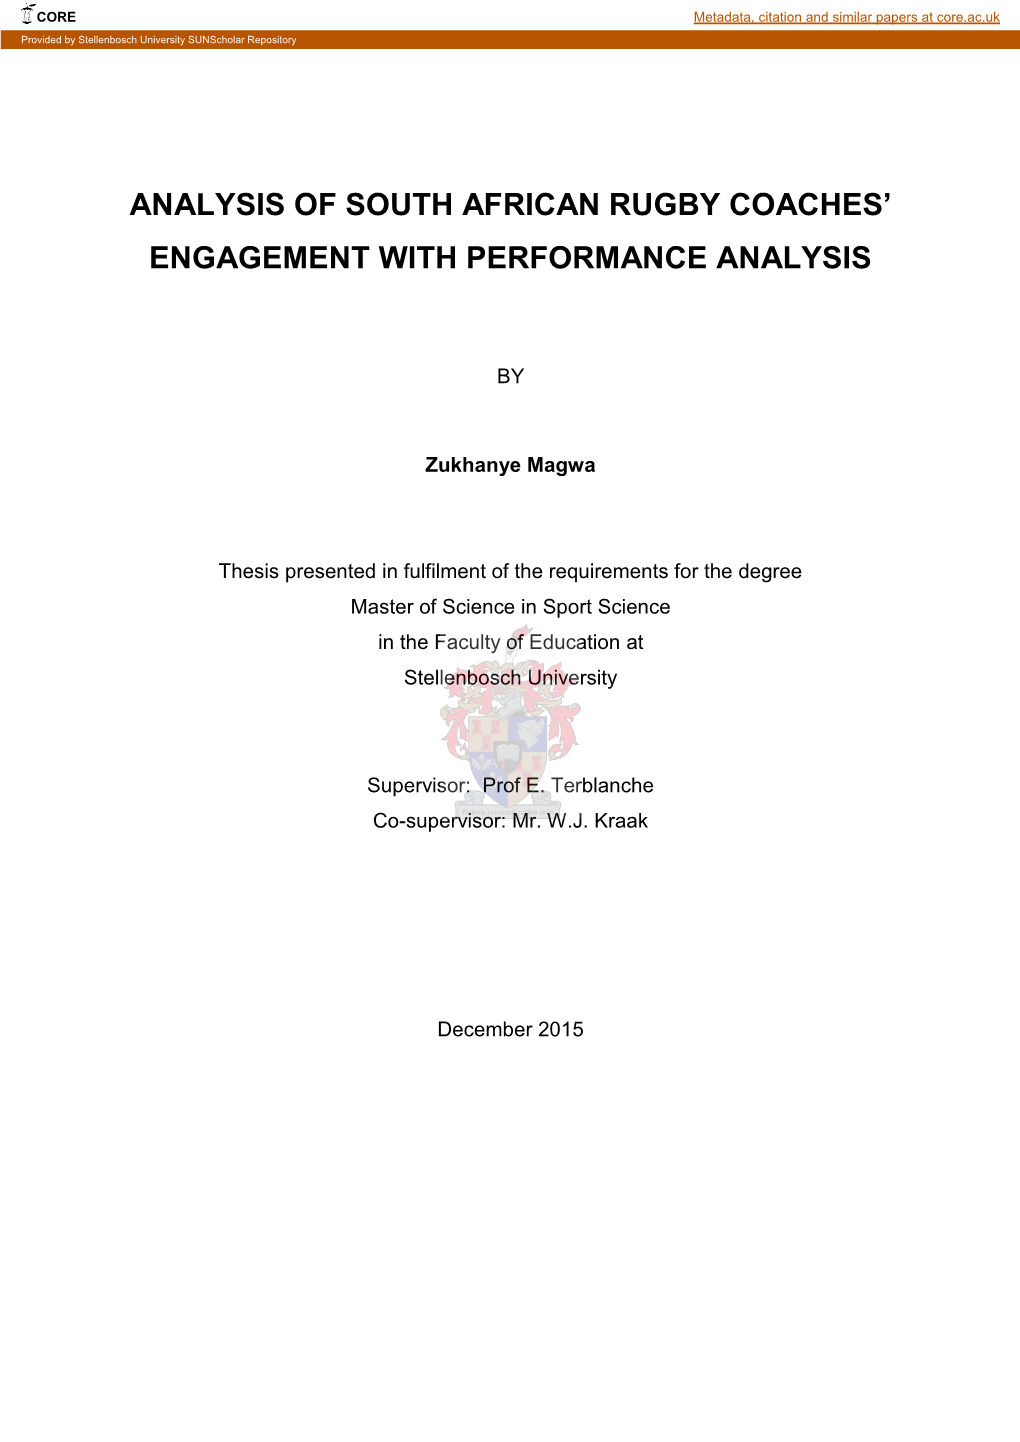 Analysis of South African Rugby Coaches’ Engagement with Performance Analysis